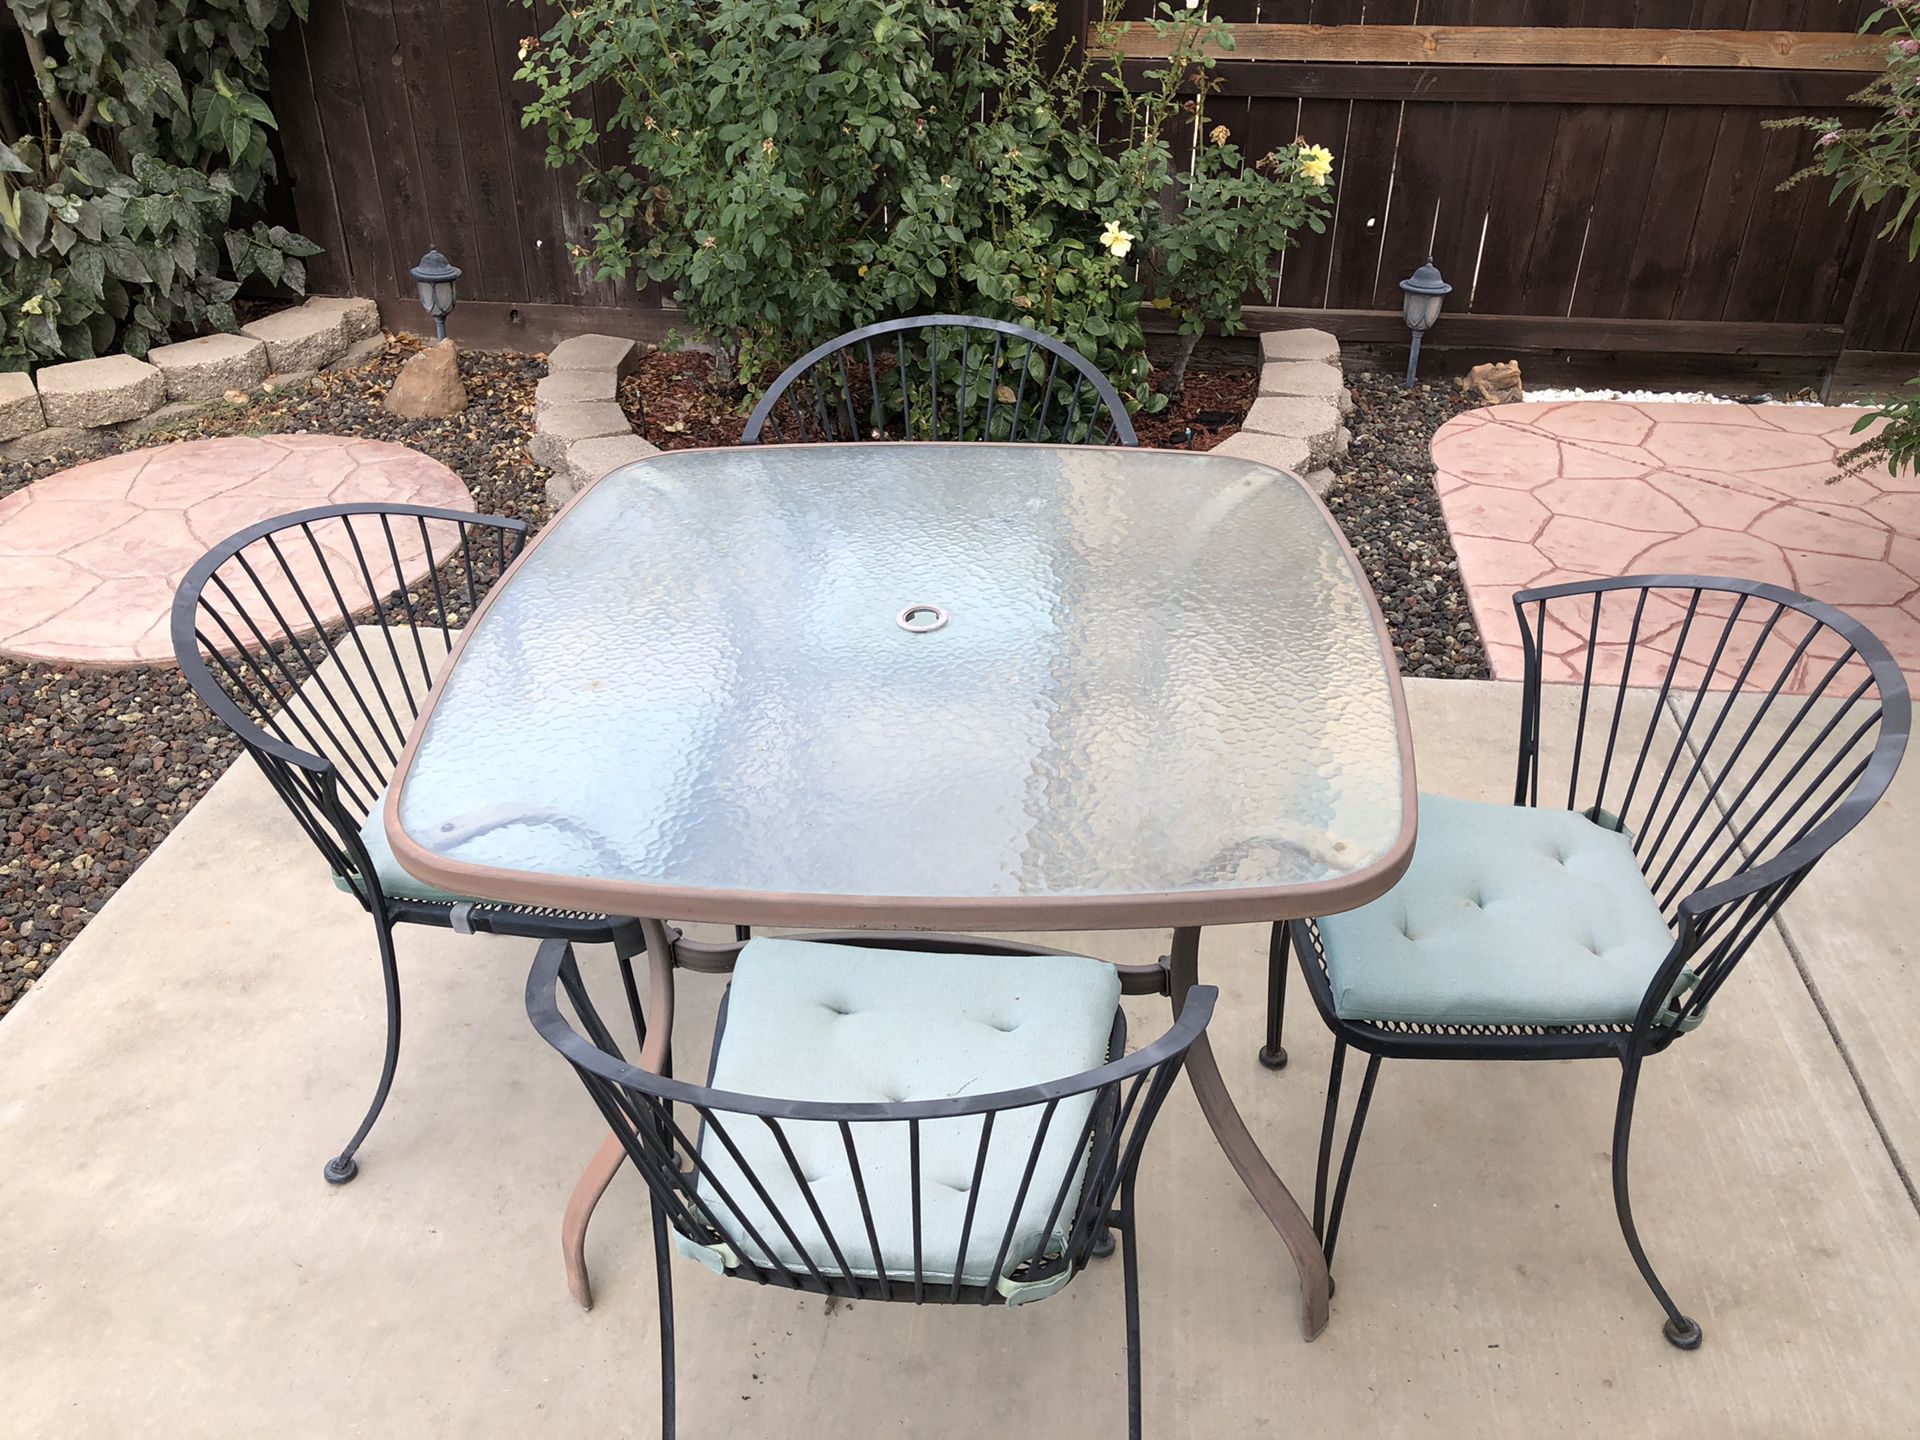 Glass top patio table and chairs.